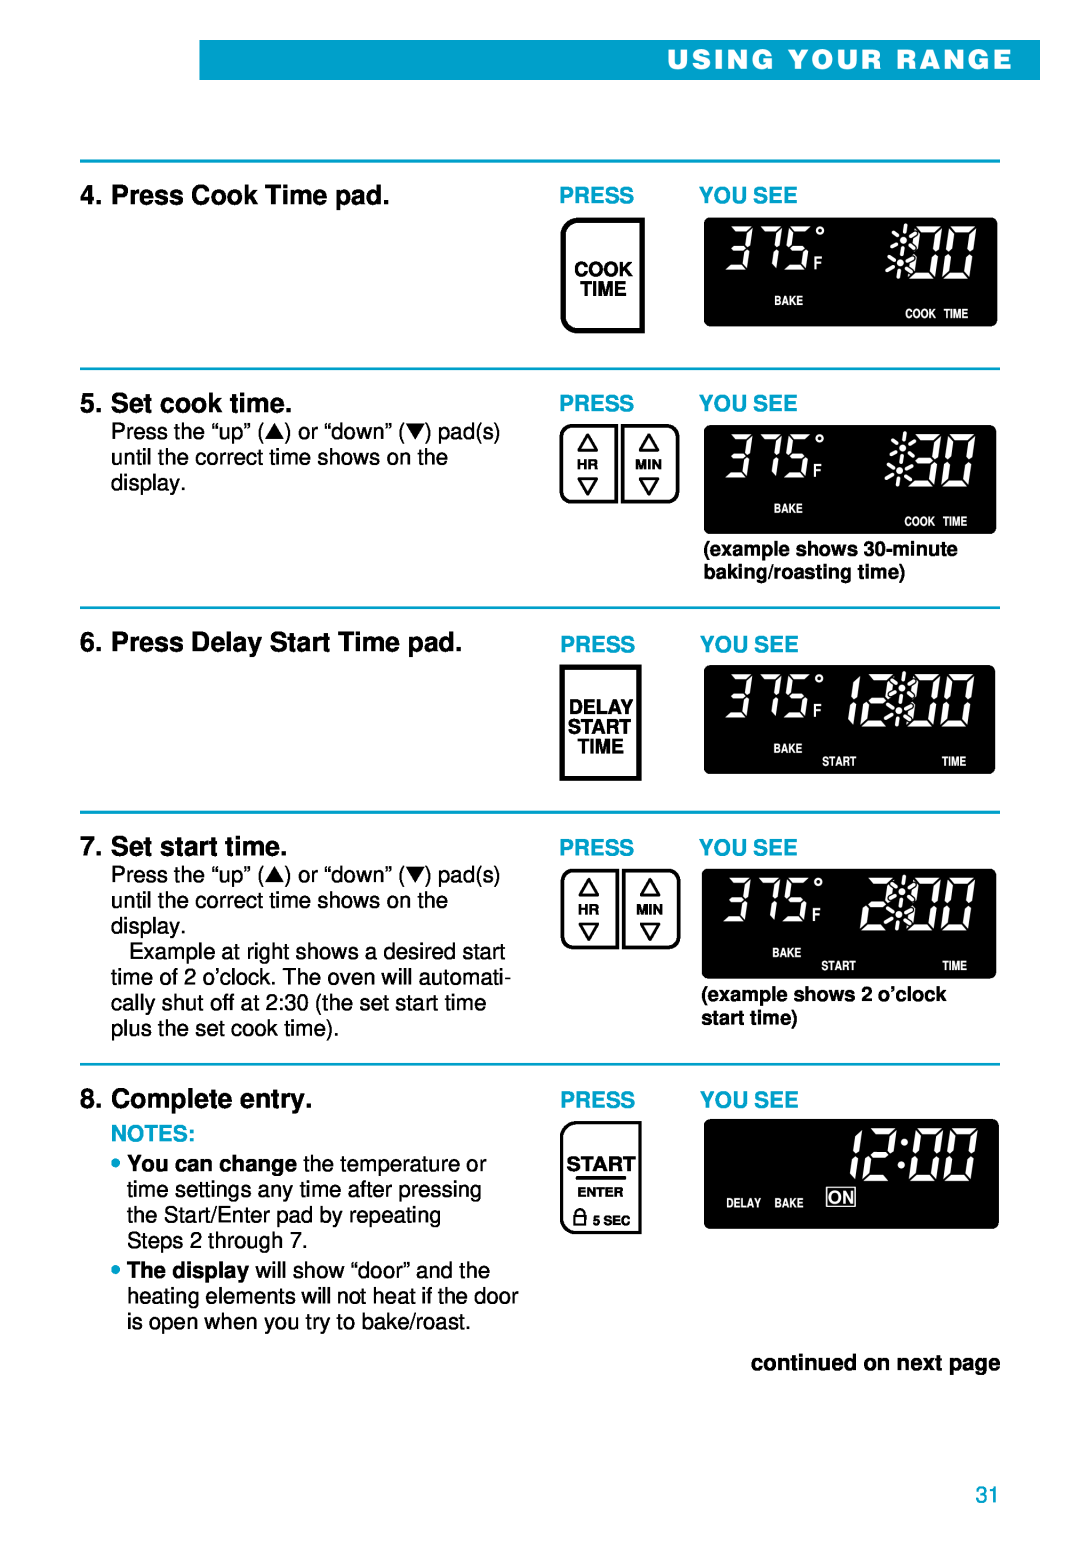 Whirlpool RS696PXE Press Delay Start Time pad, Set start time, Complete entry, Using Your Range, Press Cook Time pad 